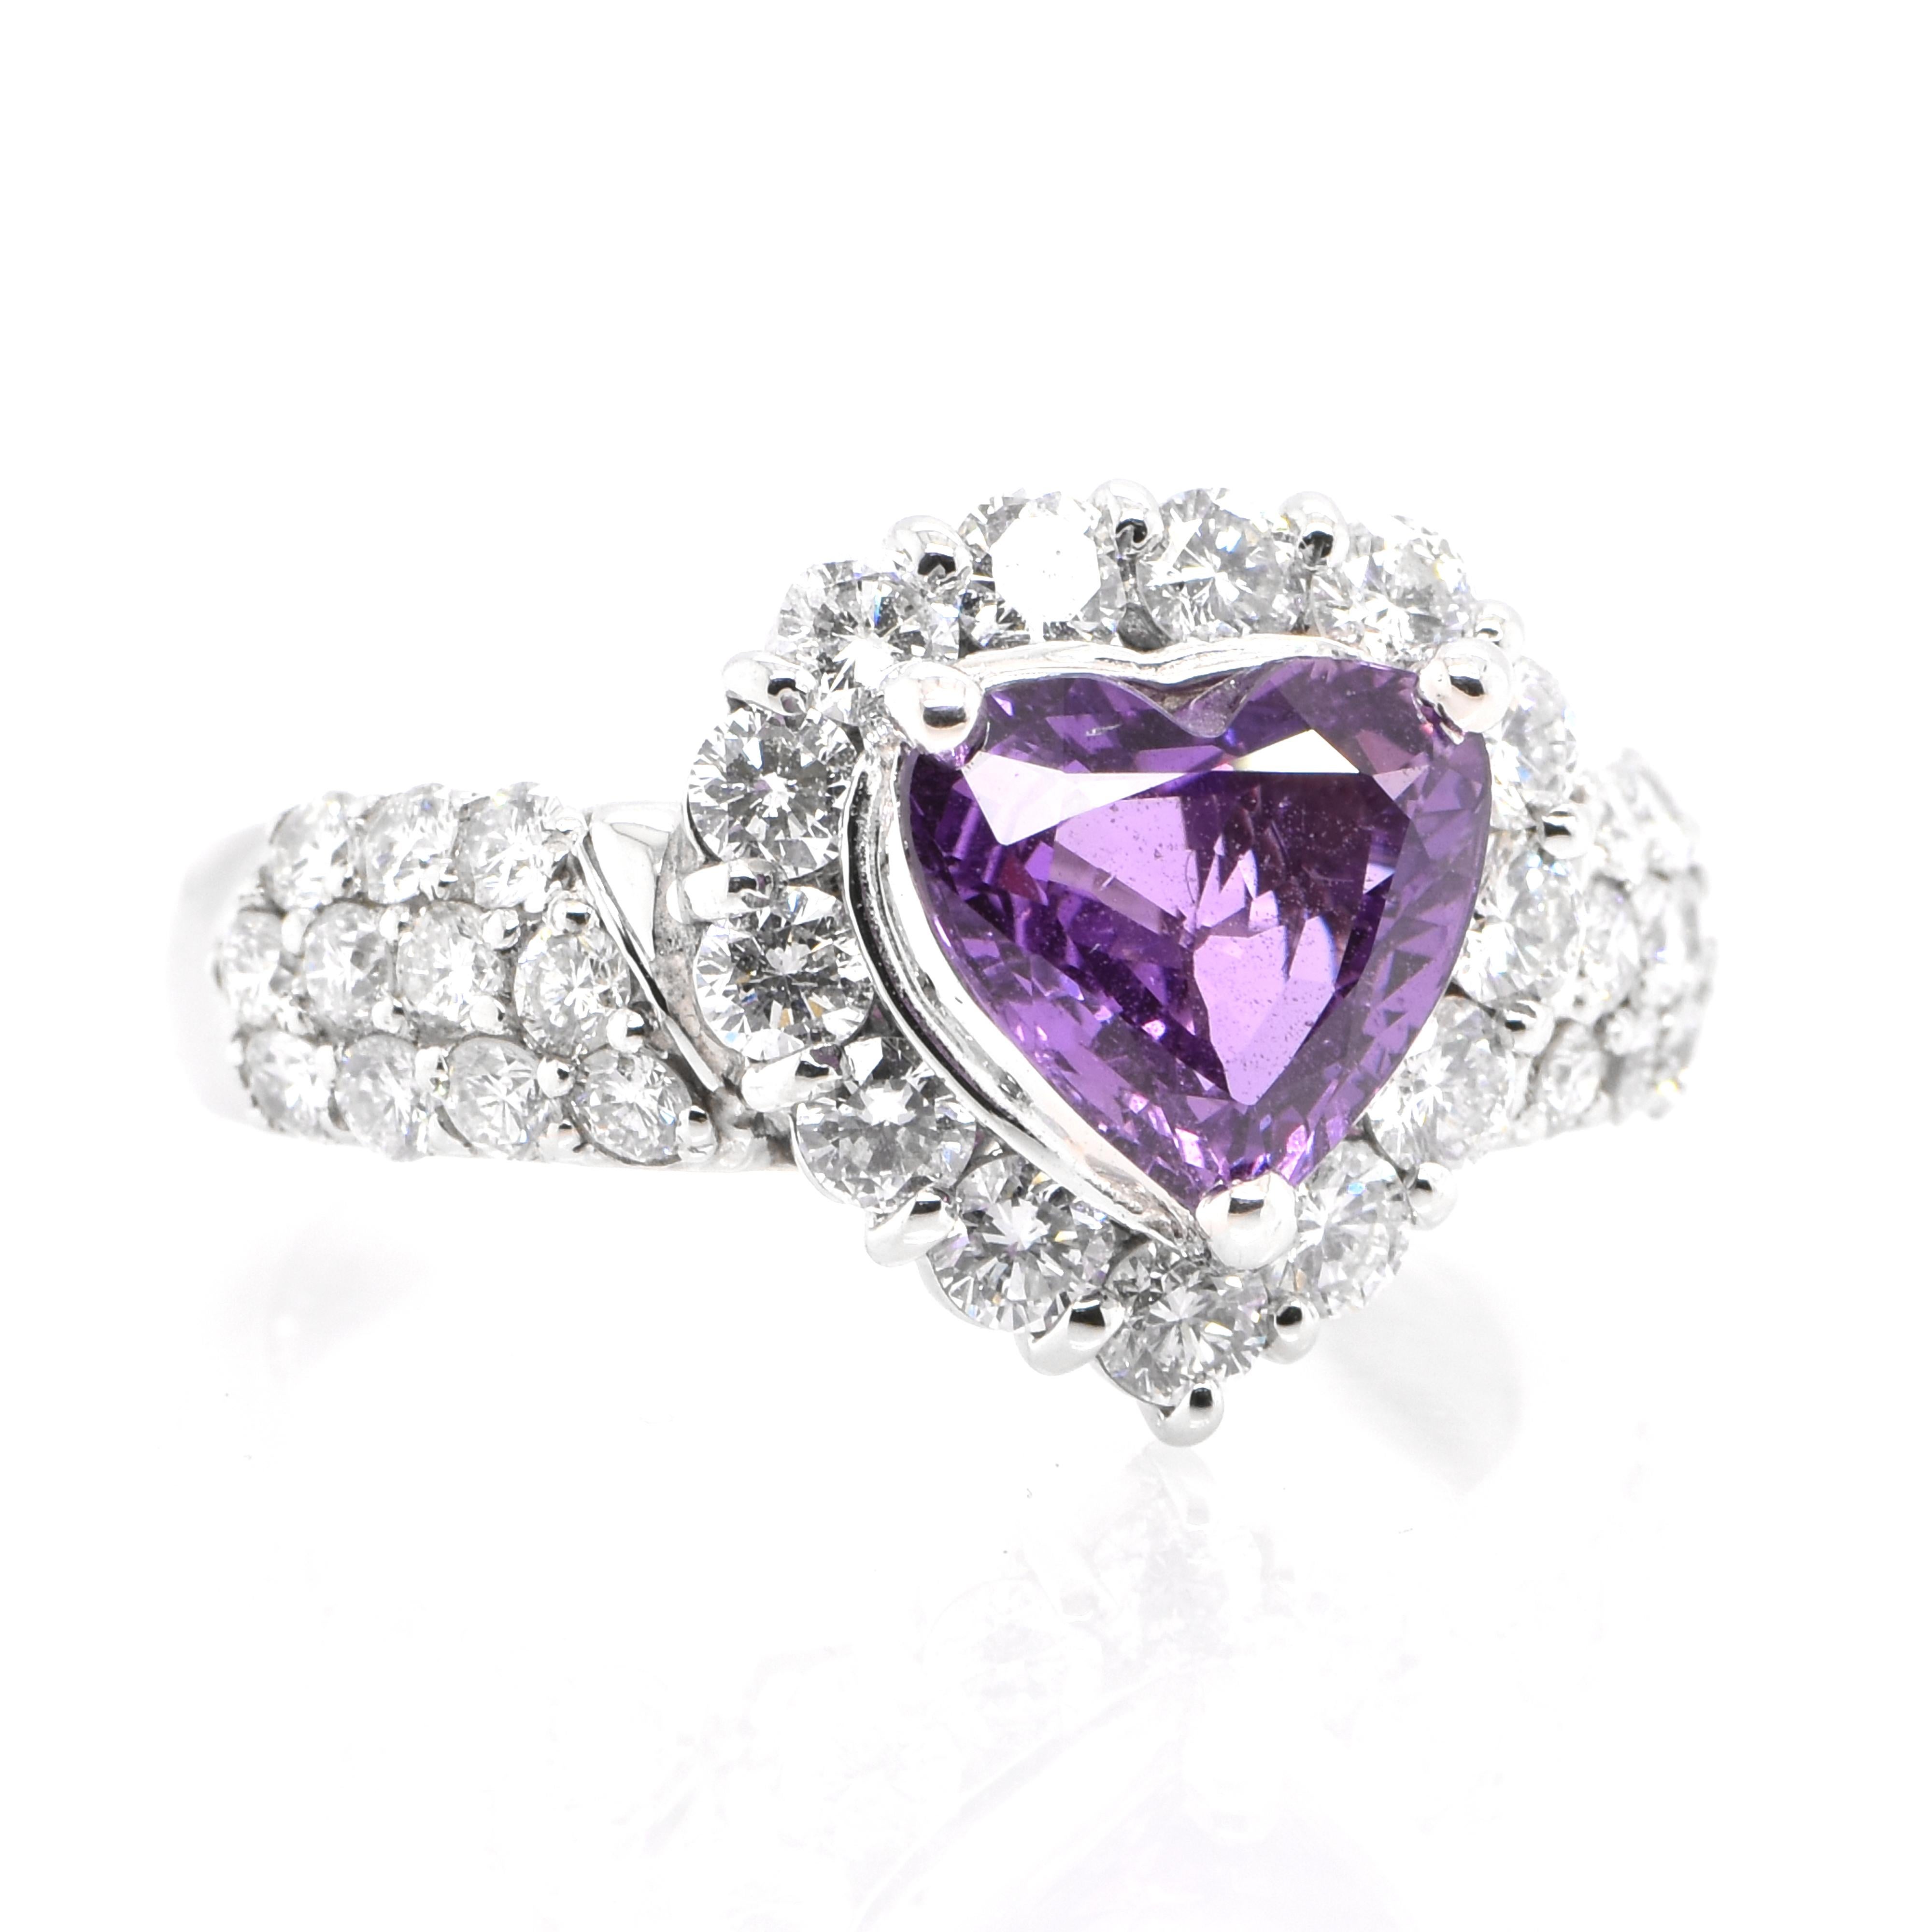 A beautiful ring featuring 2.025 Carat, Natural Unheated Purple Sapphire and 1.30 carats Diamond Accents set in Platinum. Sapphires have extraordinary durability - they excel in hardness as well as toughness and durability making them very popular